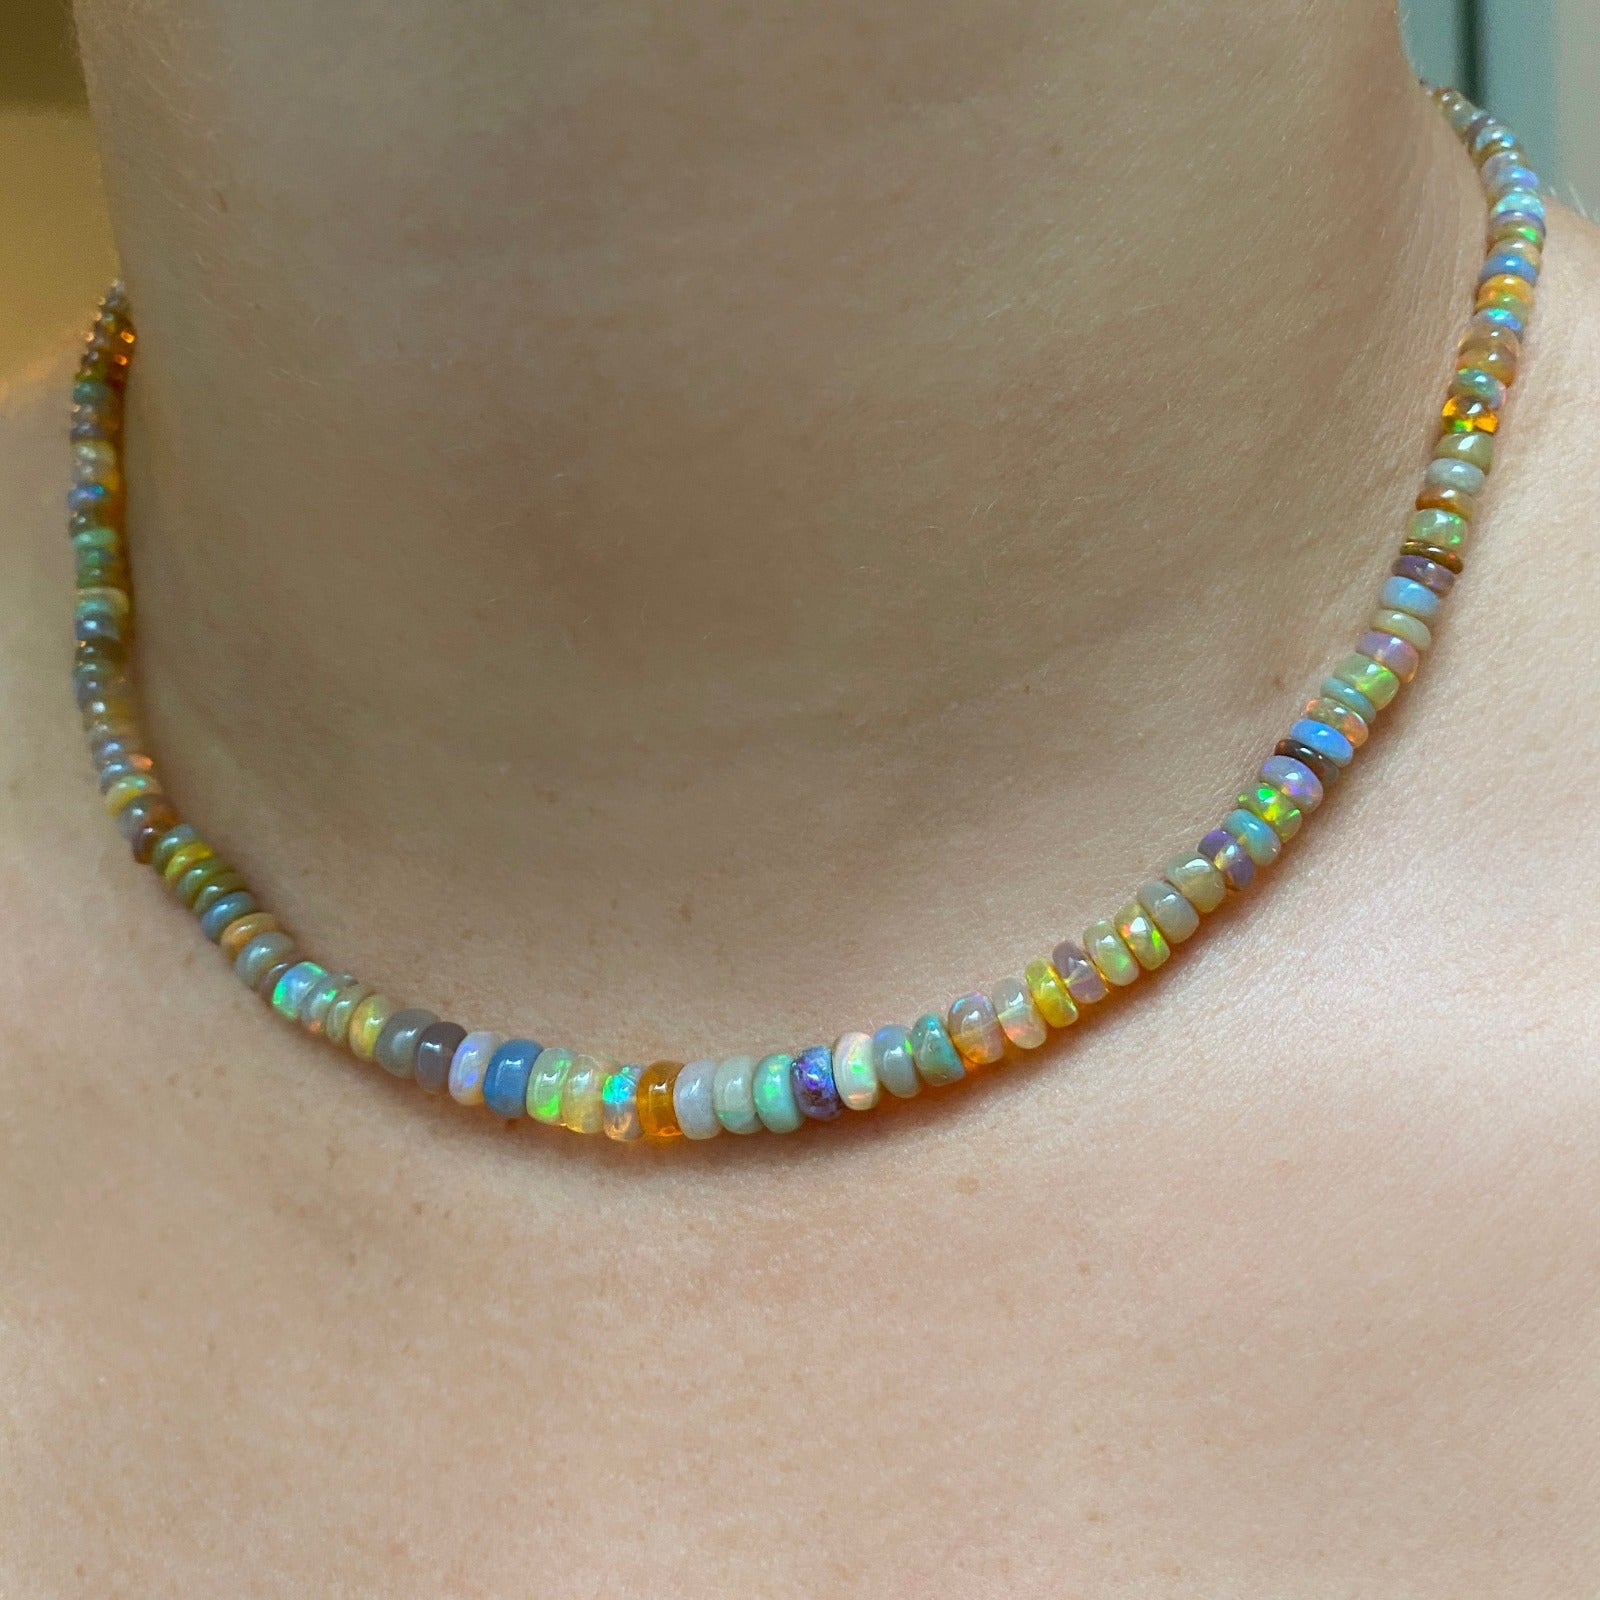 Shimmering beaded necklace made of smooth opal rondels in shades of light yellow, light orange, white, and brown on a slim gold lobster clasp.